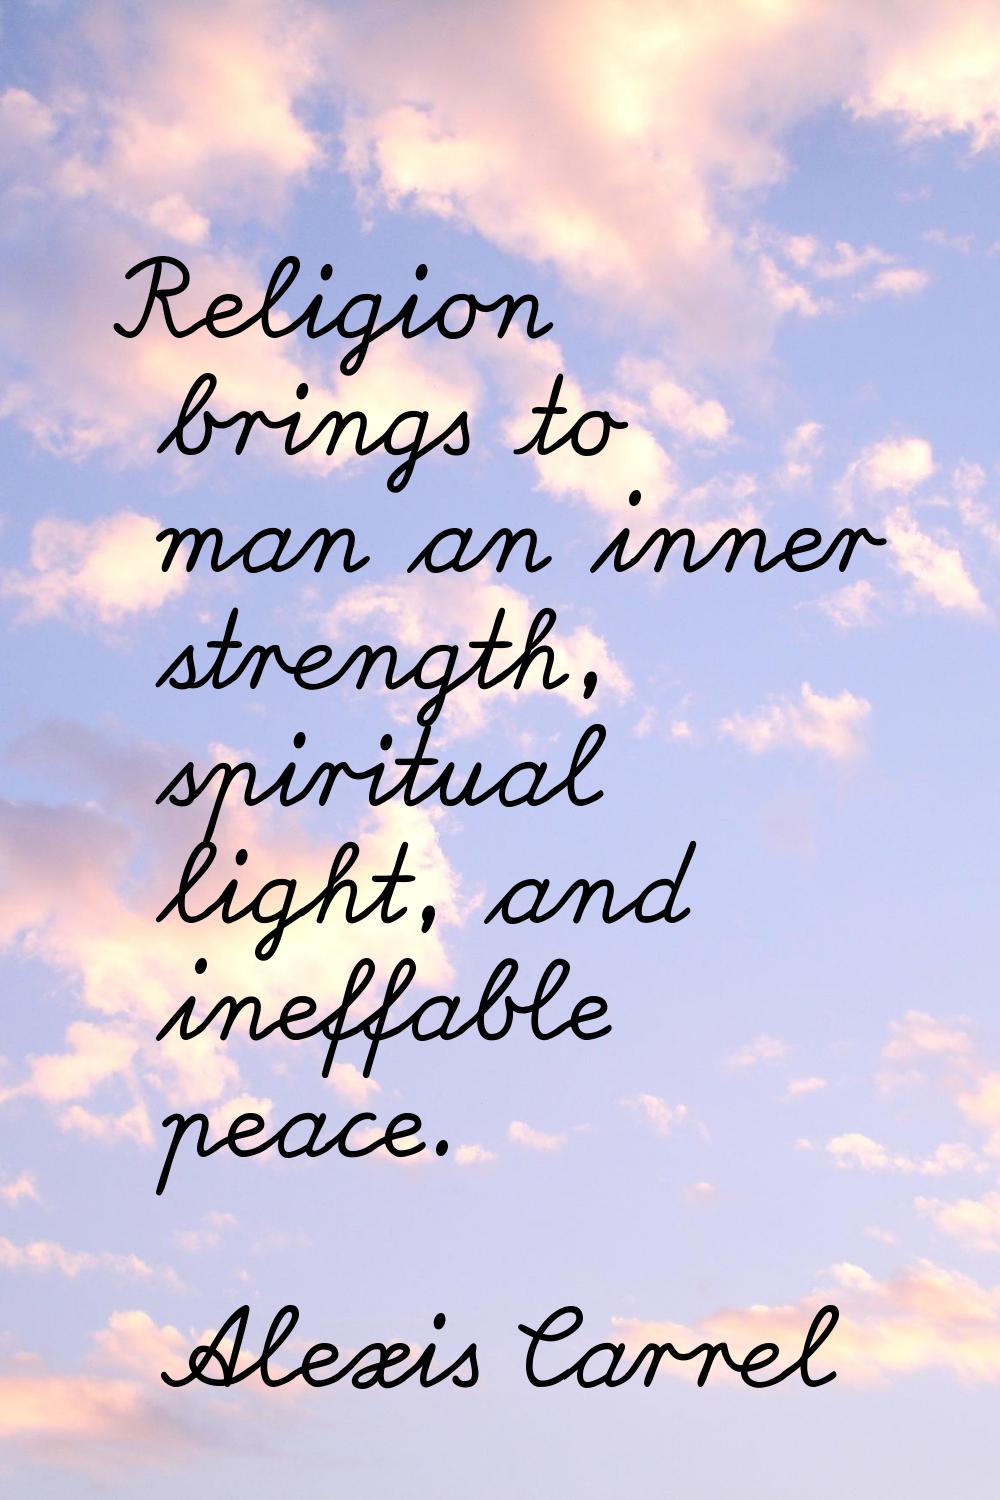 Religion brings to man an inner strength, spiritual light, and ineffable peace.